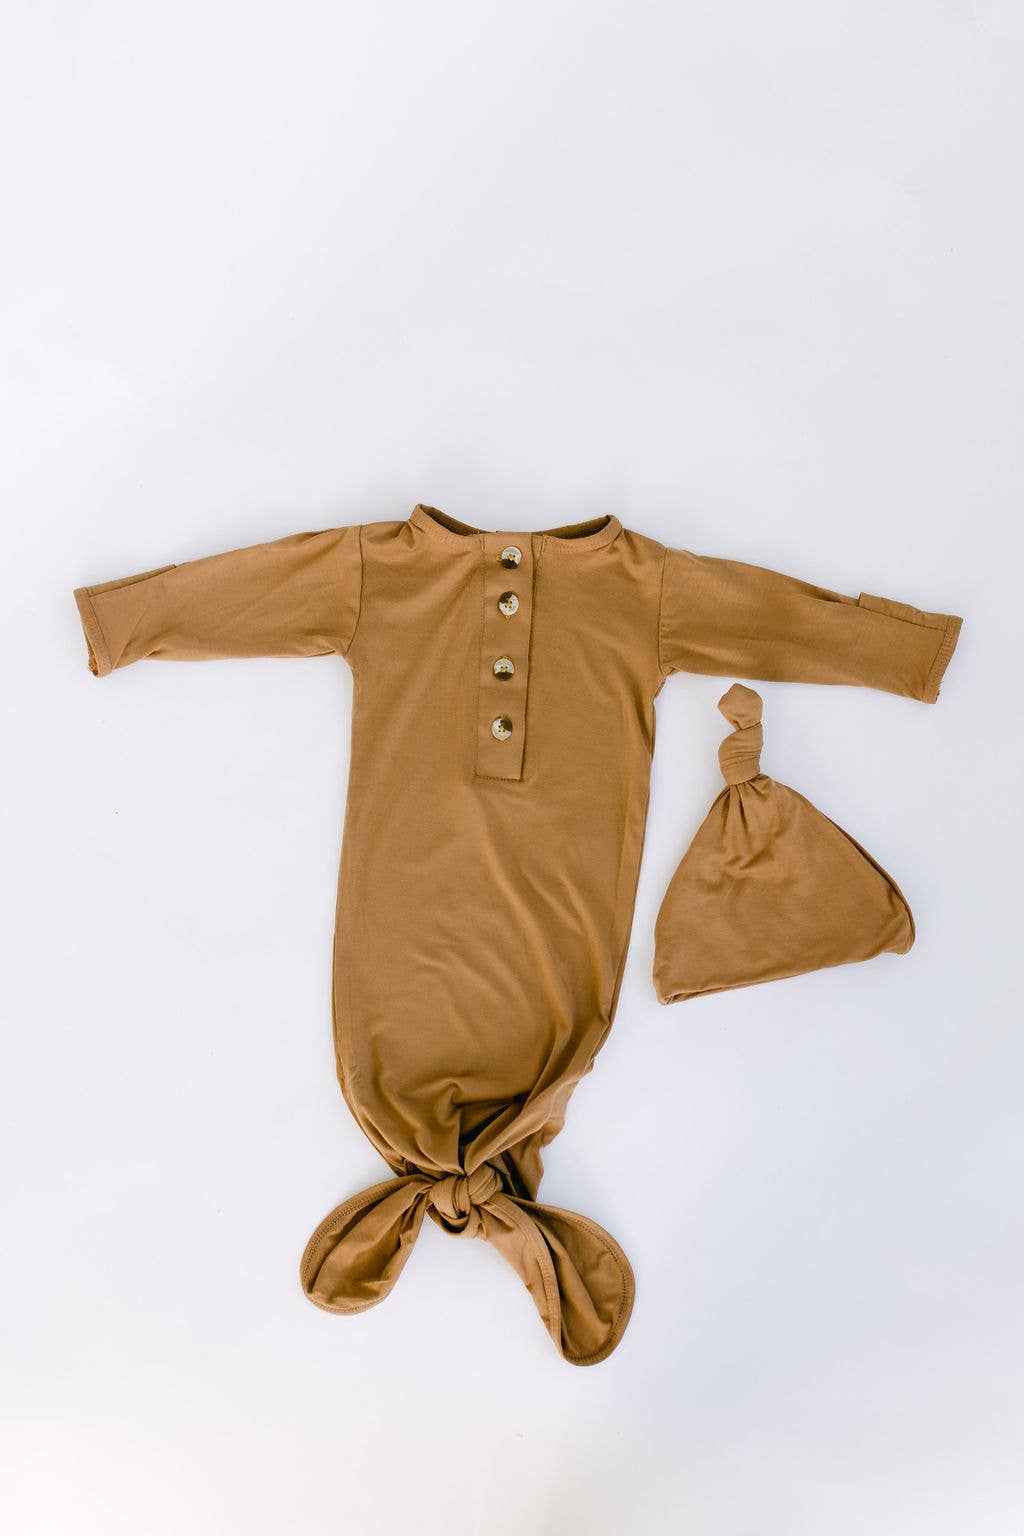 Knotted Baby Gown Set (Newborn - 3 mo.) - Camel Brown: Hat and Headband